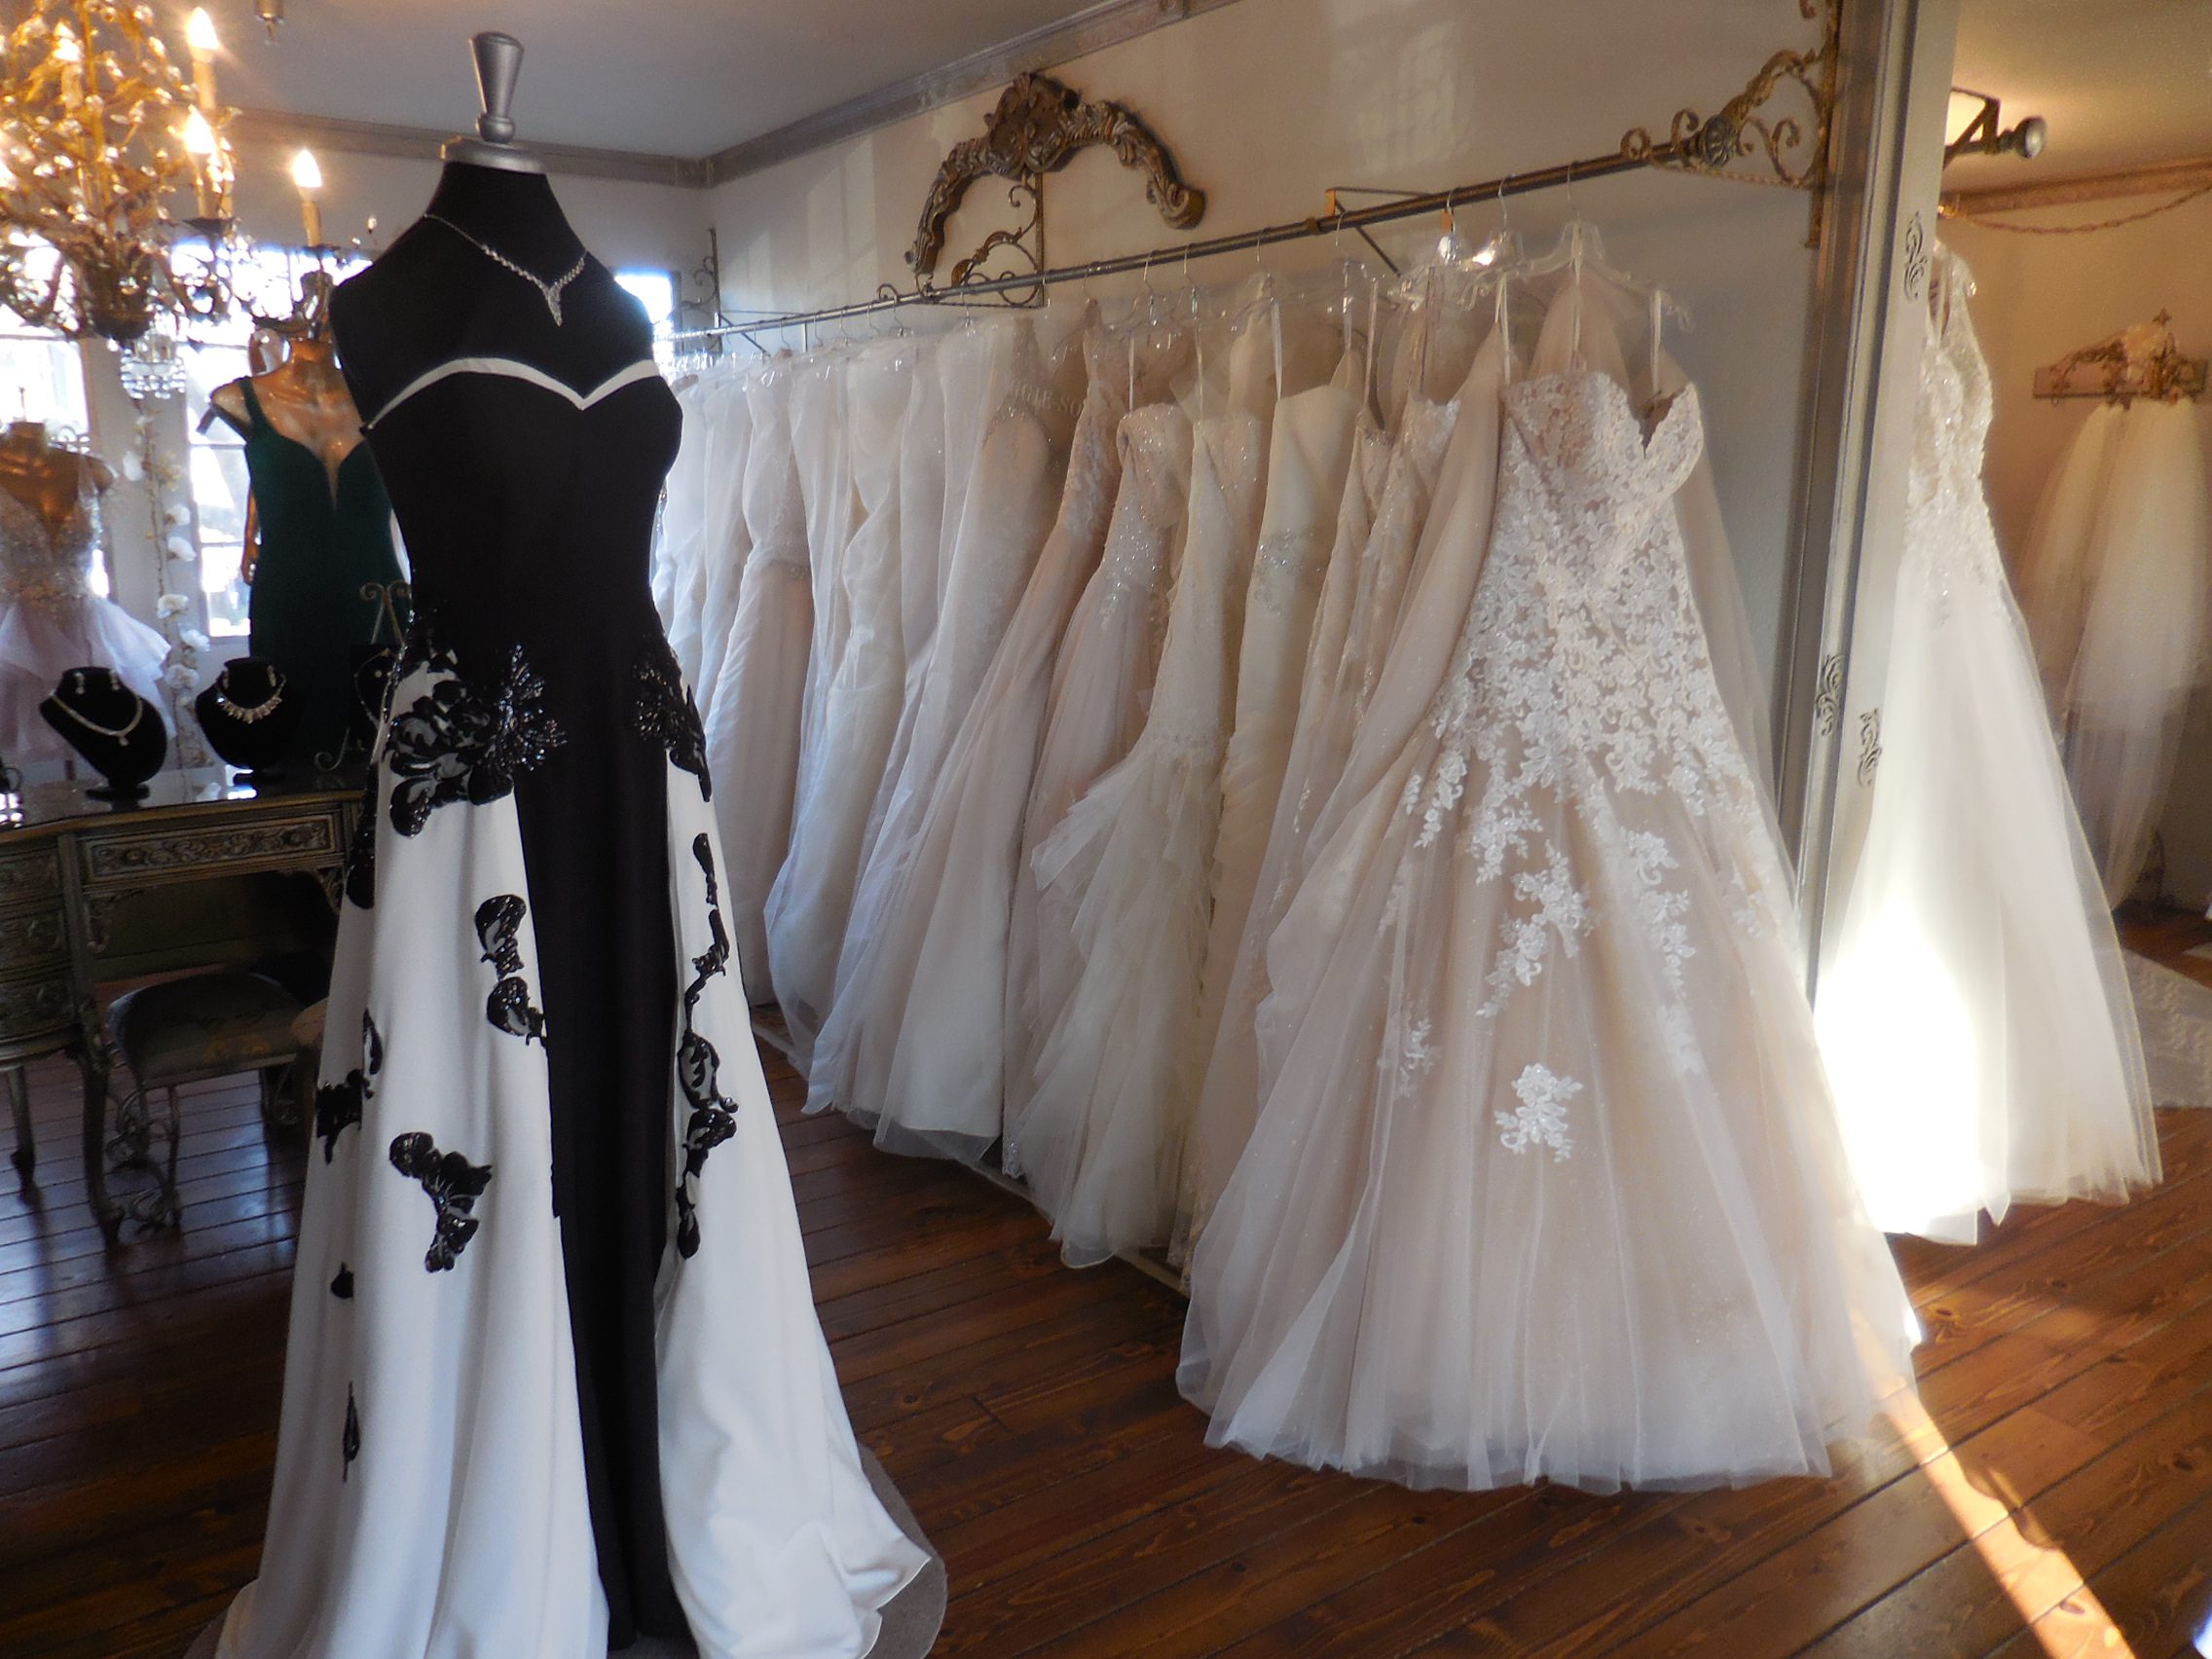 Bella Bridal provides ‘bella’ gowns for weddings, proms, parties